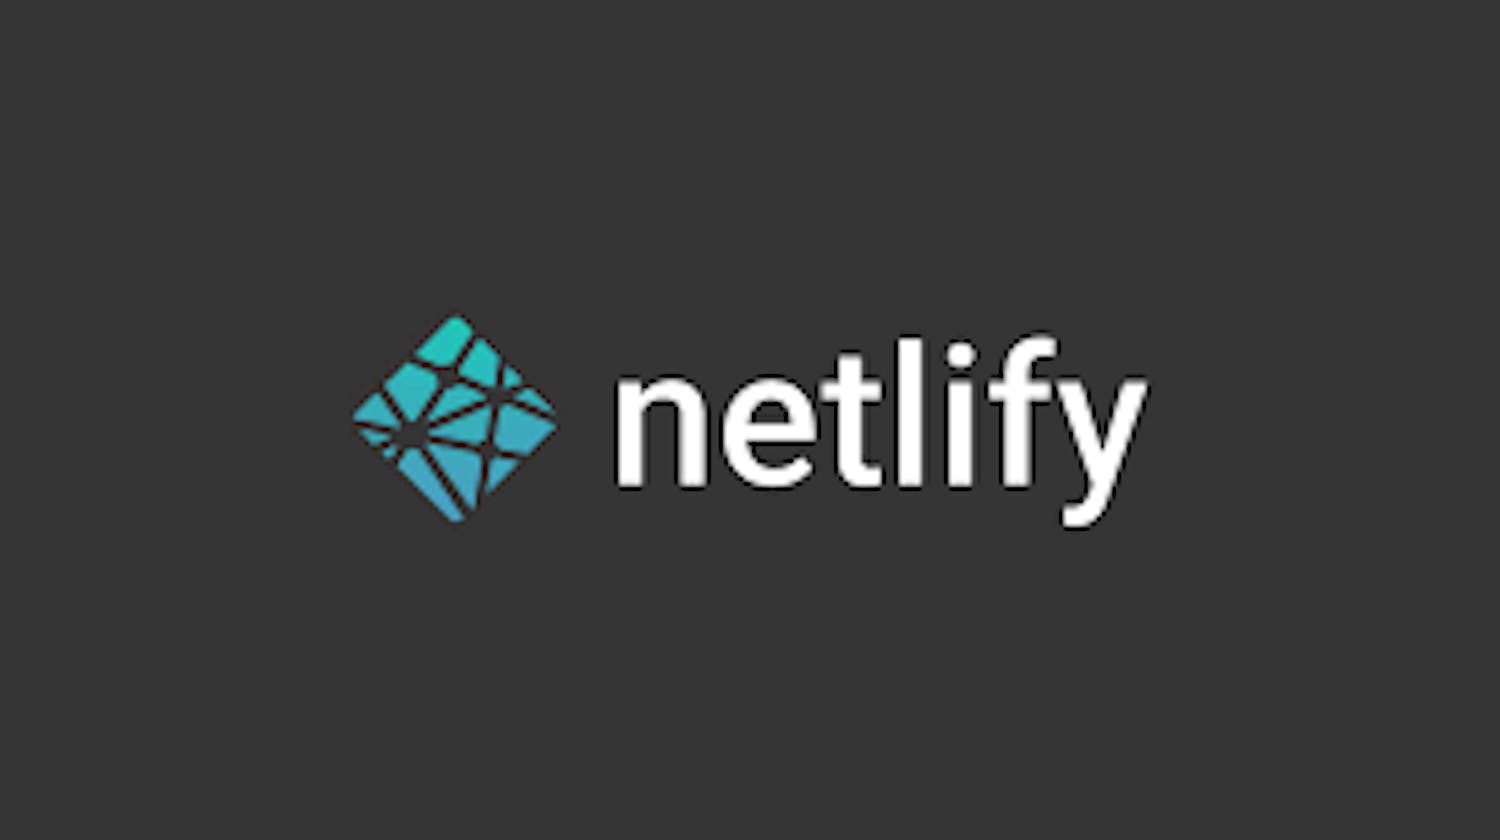 How to deploy your first website on netlify?